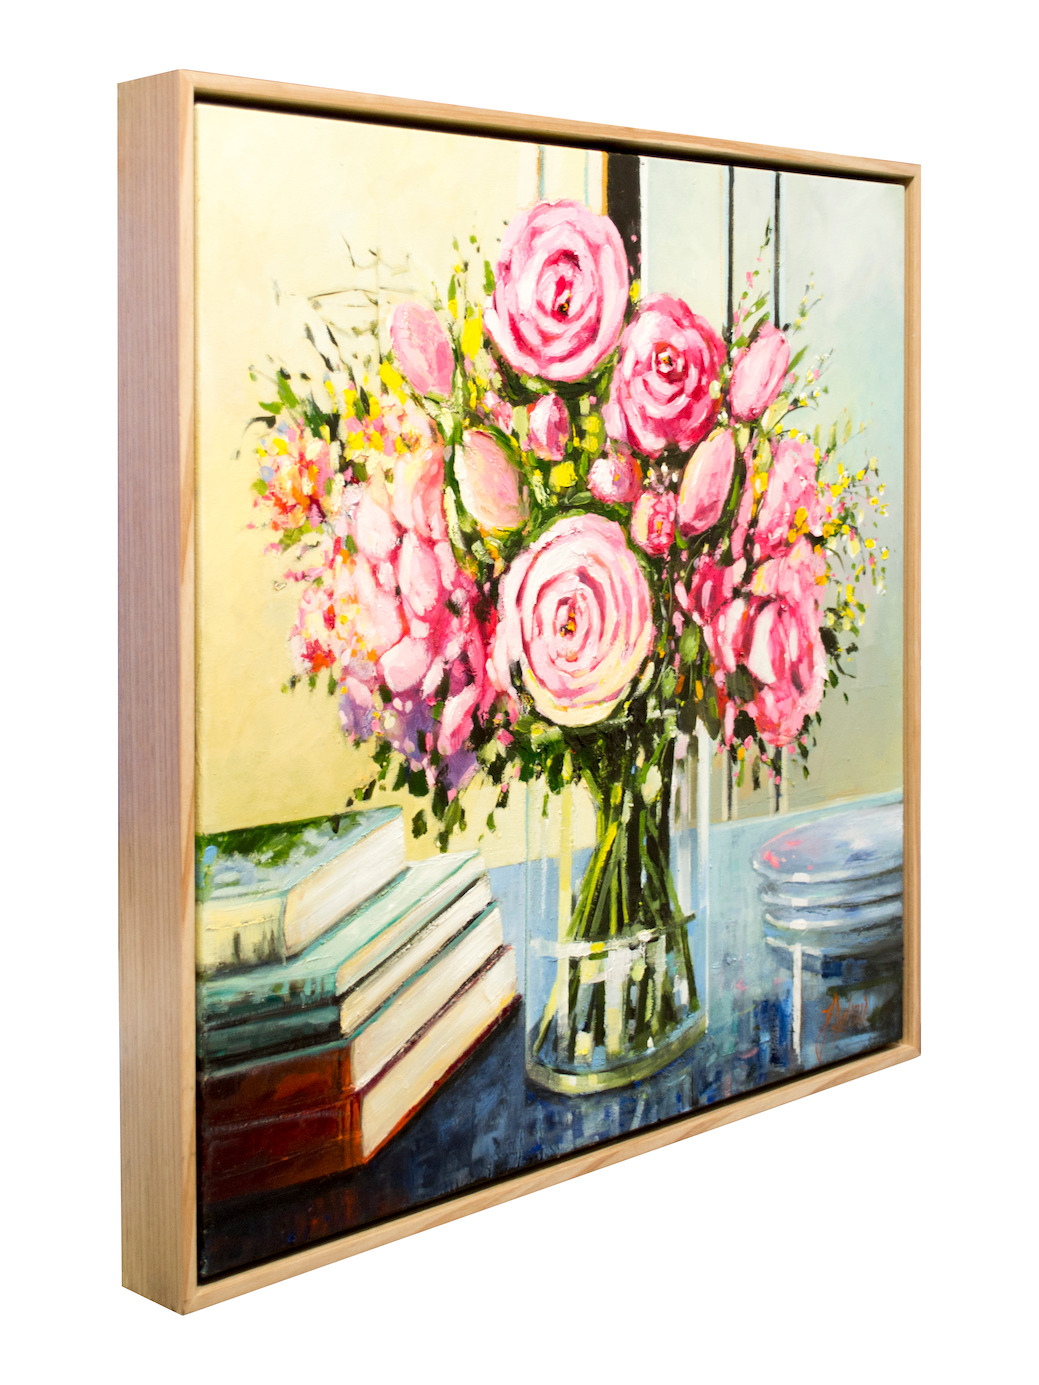 Framed Side View Of Still Life Painting "Embracing The Simple Things in Life" By Judith Dalozzo